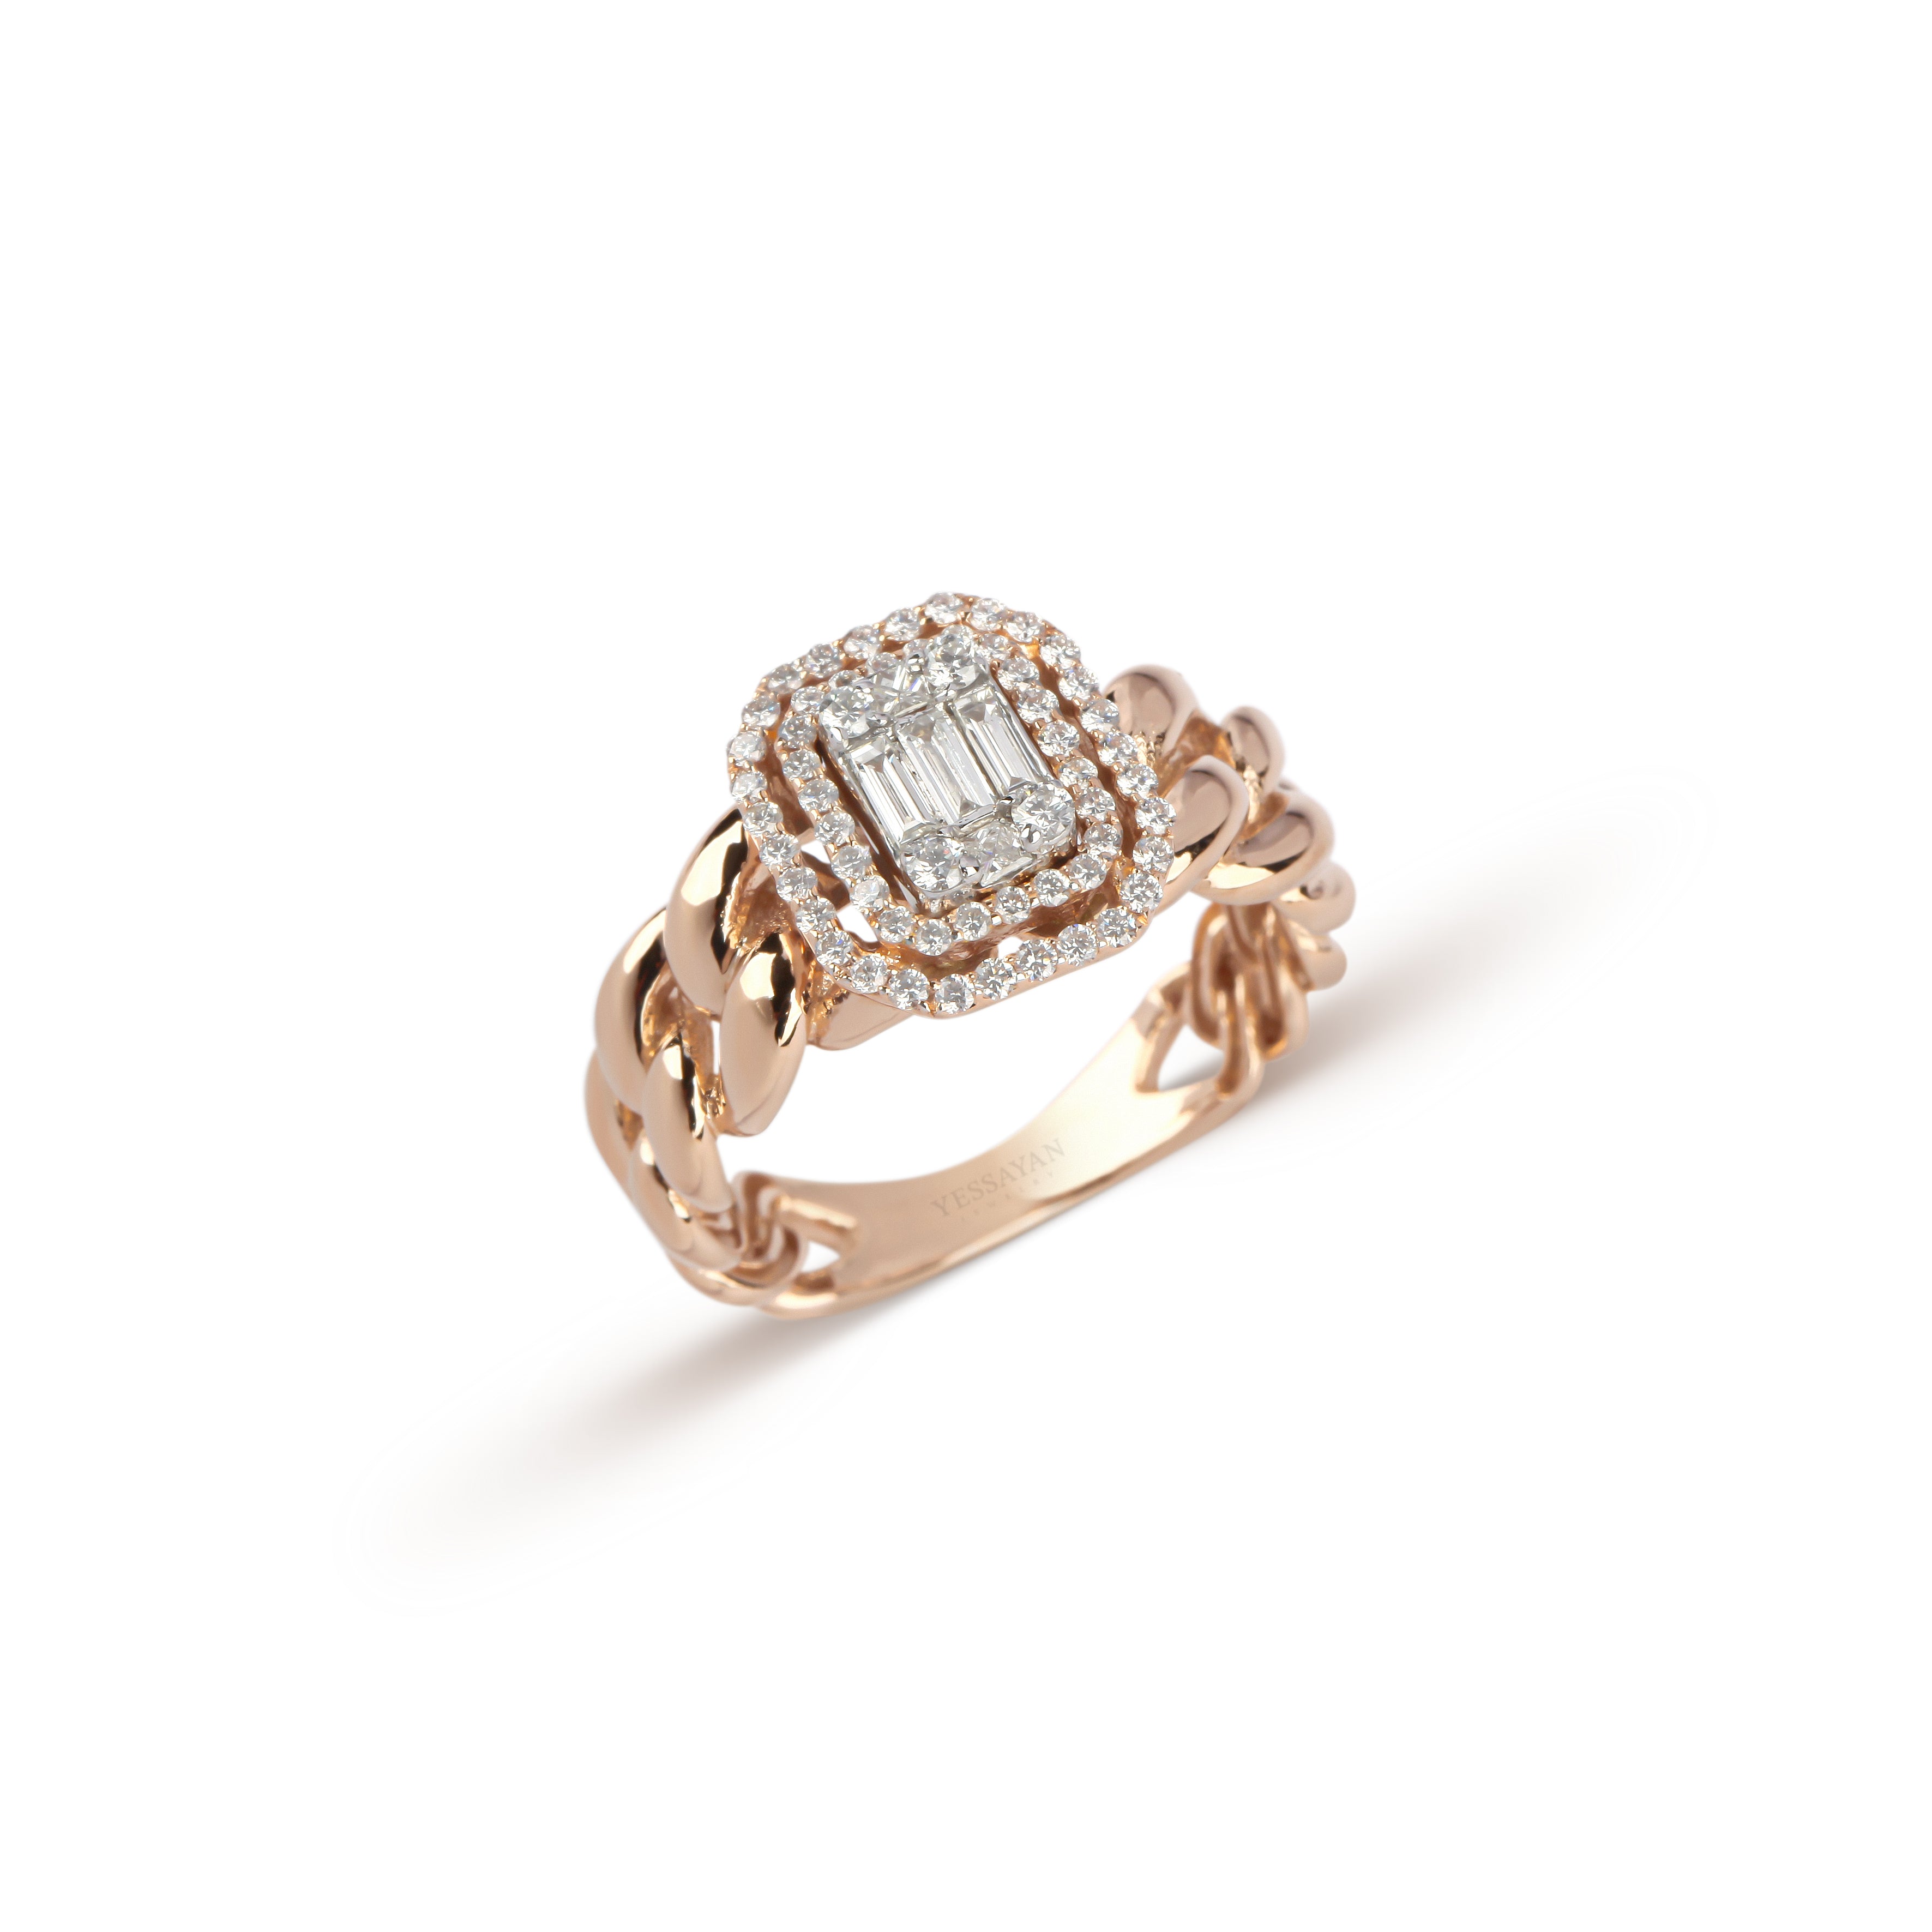 Rose Gold Double Frame Chain Diamond Ring | jewellery store | jewellery stores online